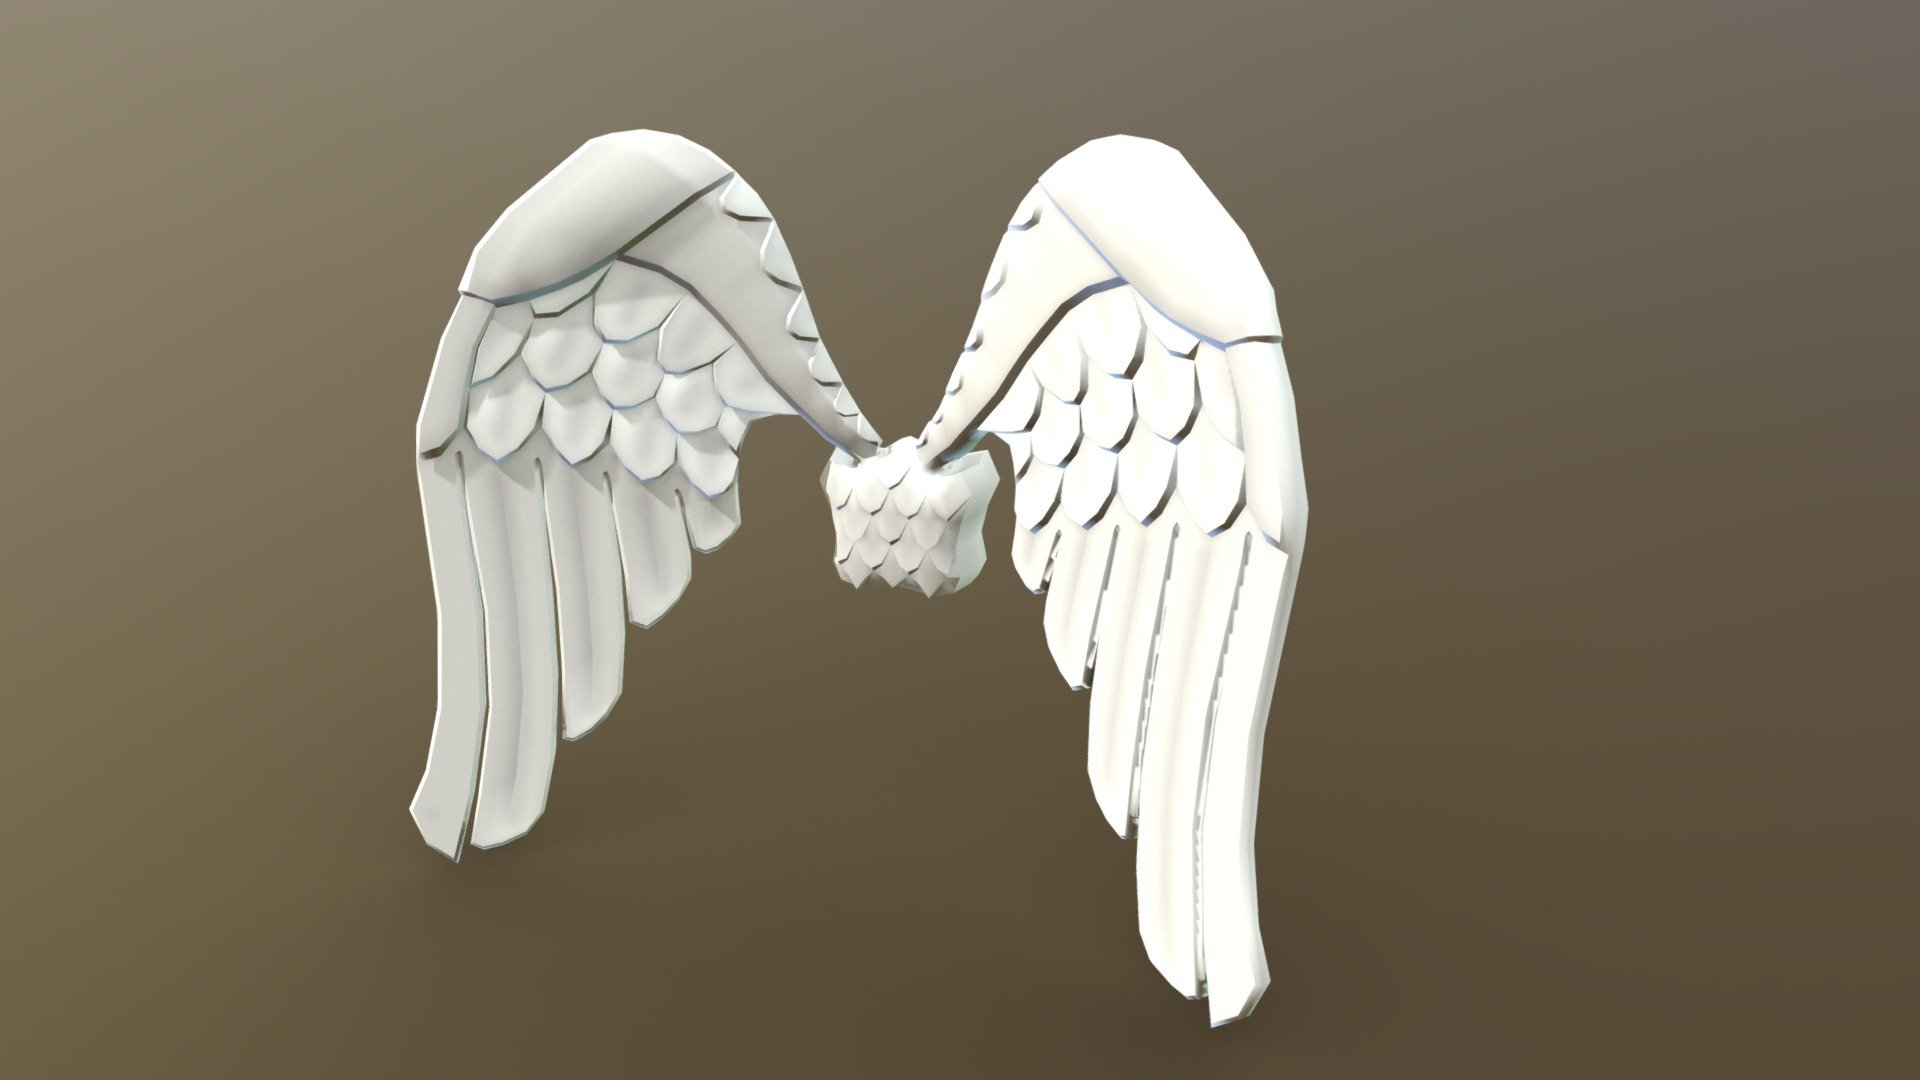 Simple Angel wings that was created as a customisable option in a game created during University.
This was created amongst others all sharing the same Texture set 3d model